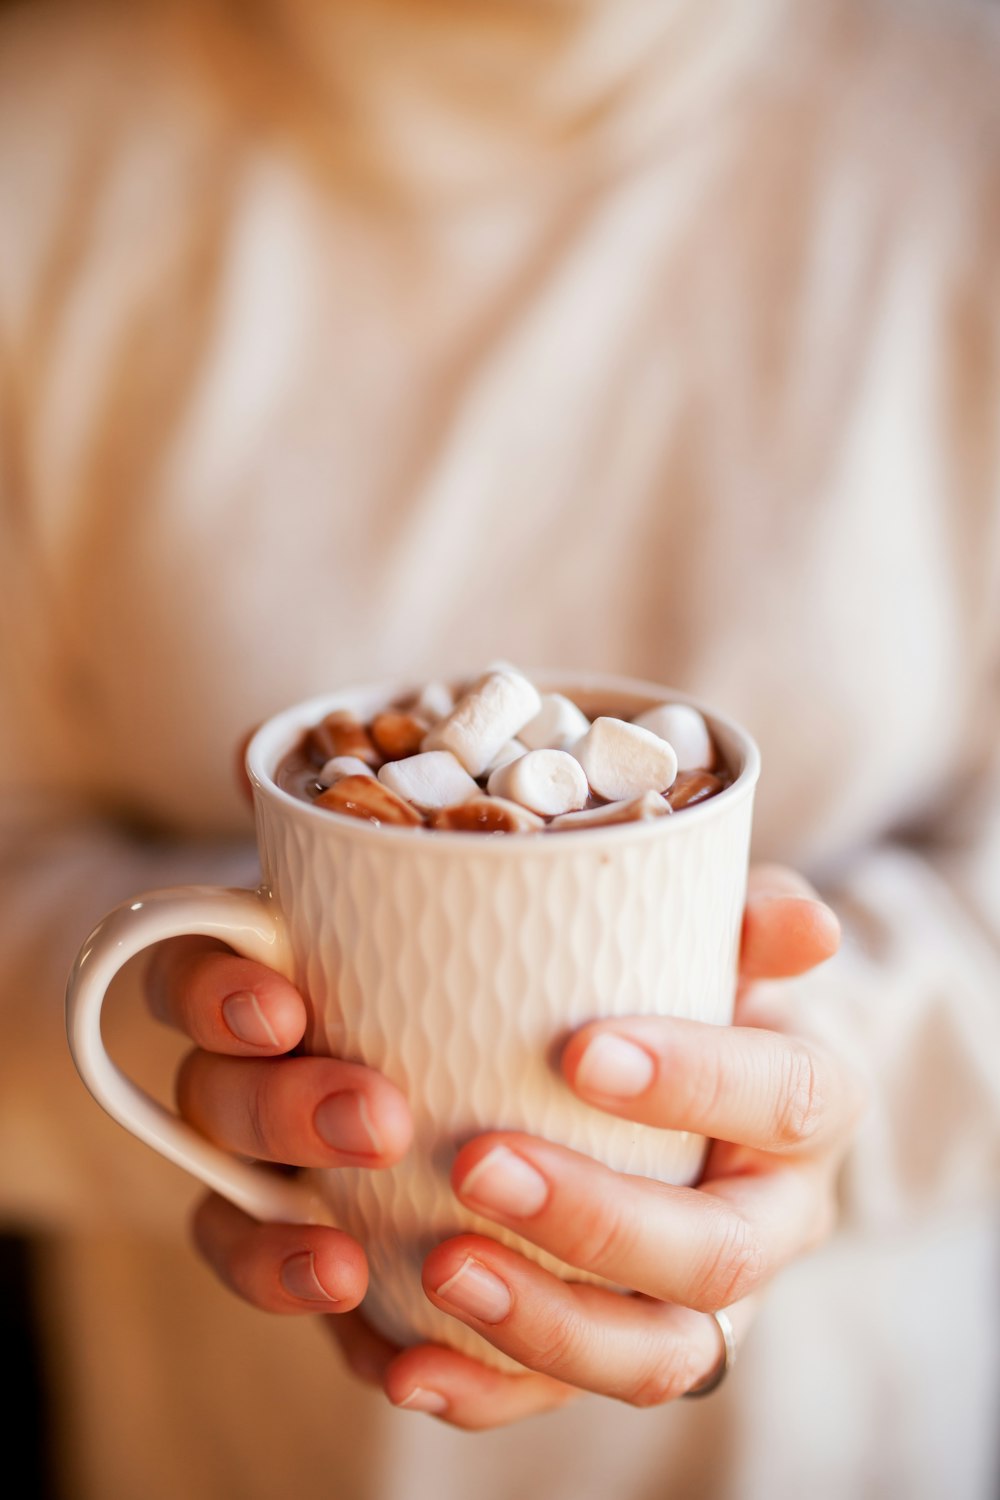 person holding white ceramic mug with brown and white beans